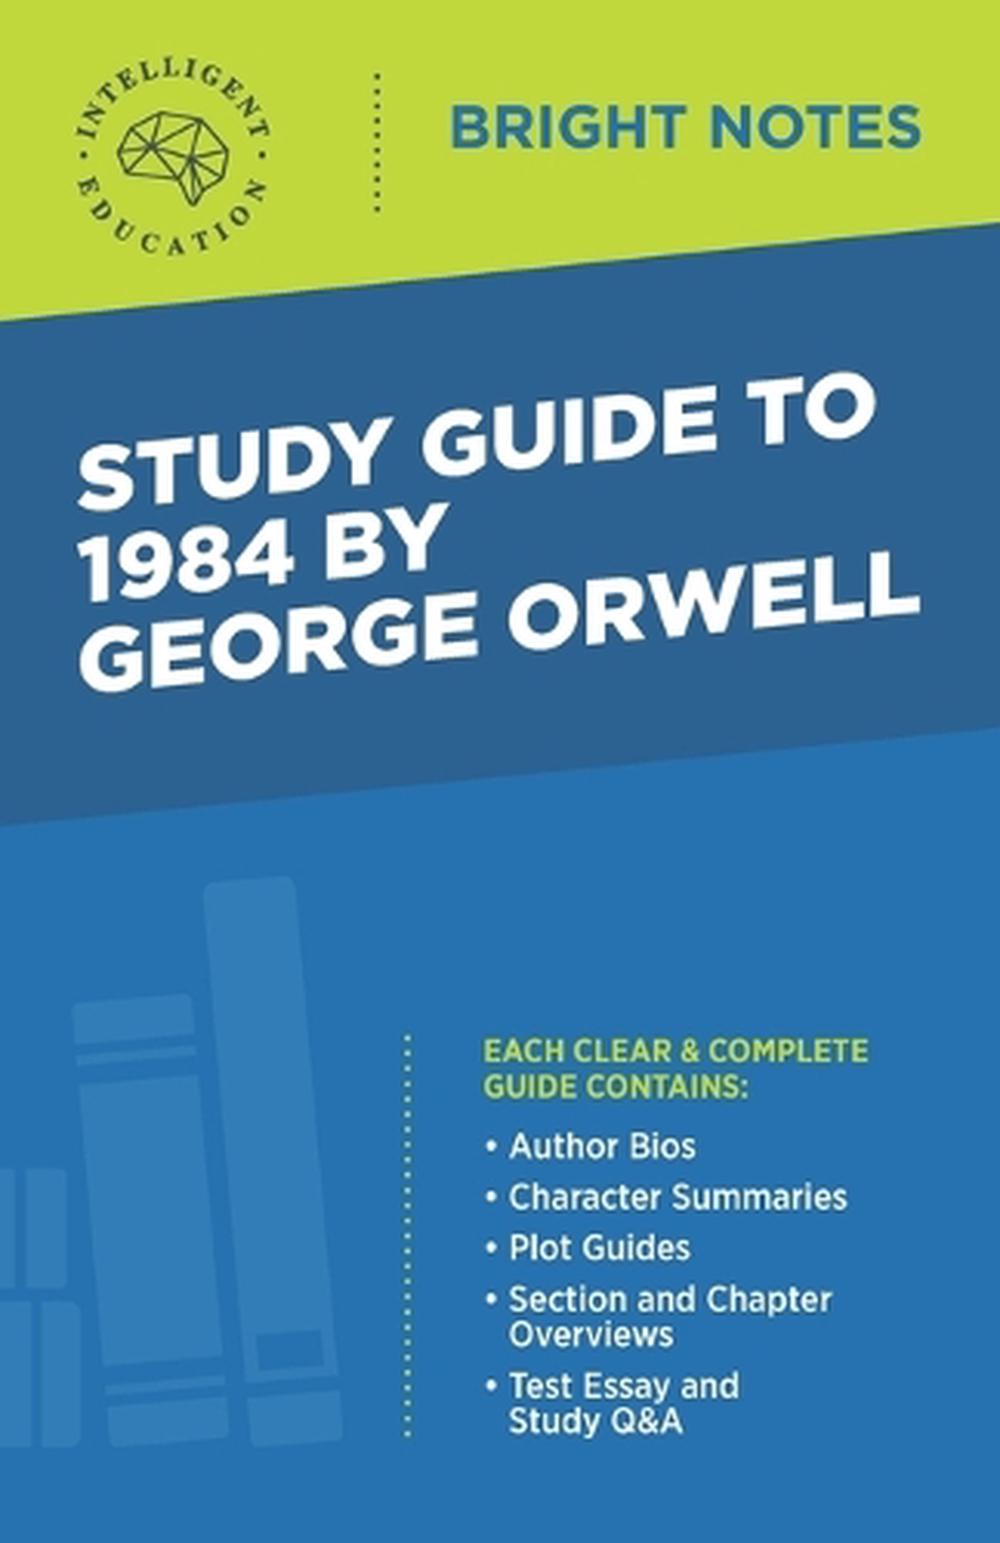 Study Guide to 1984 by Orwell Free Shipping! 9781645421689 eBay